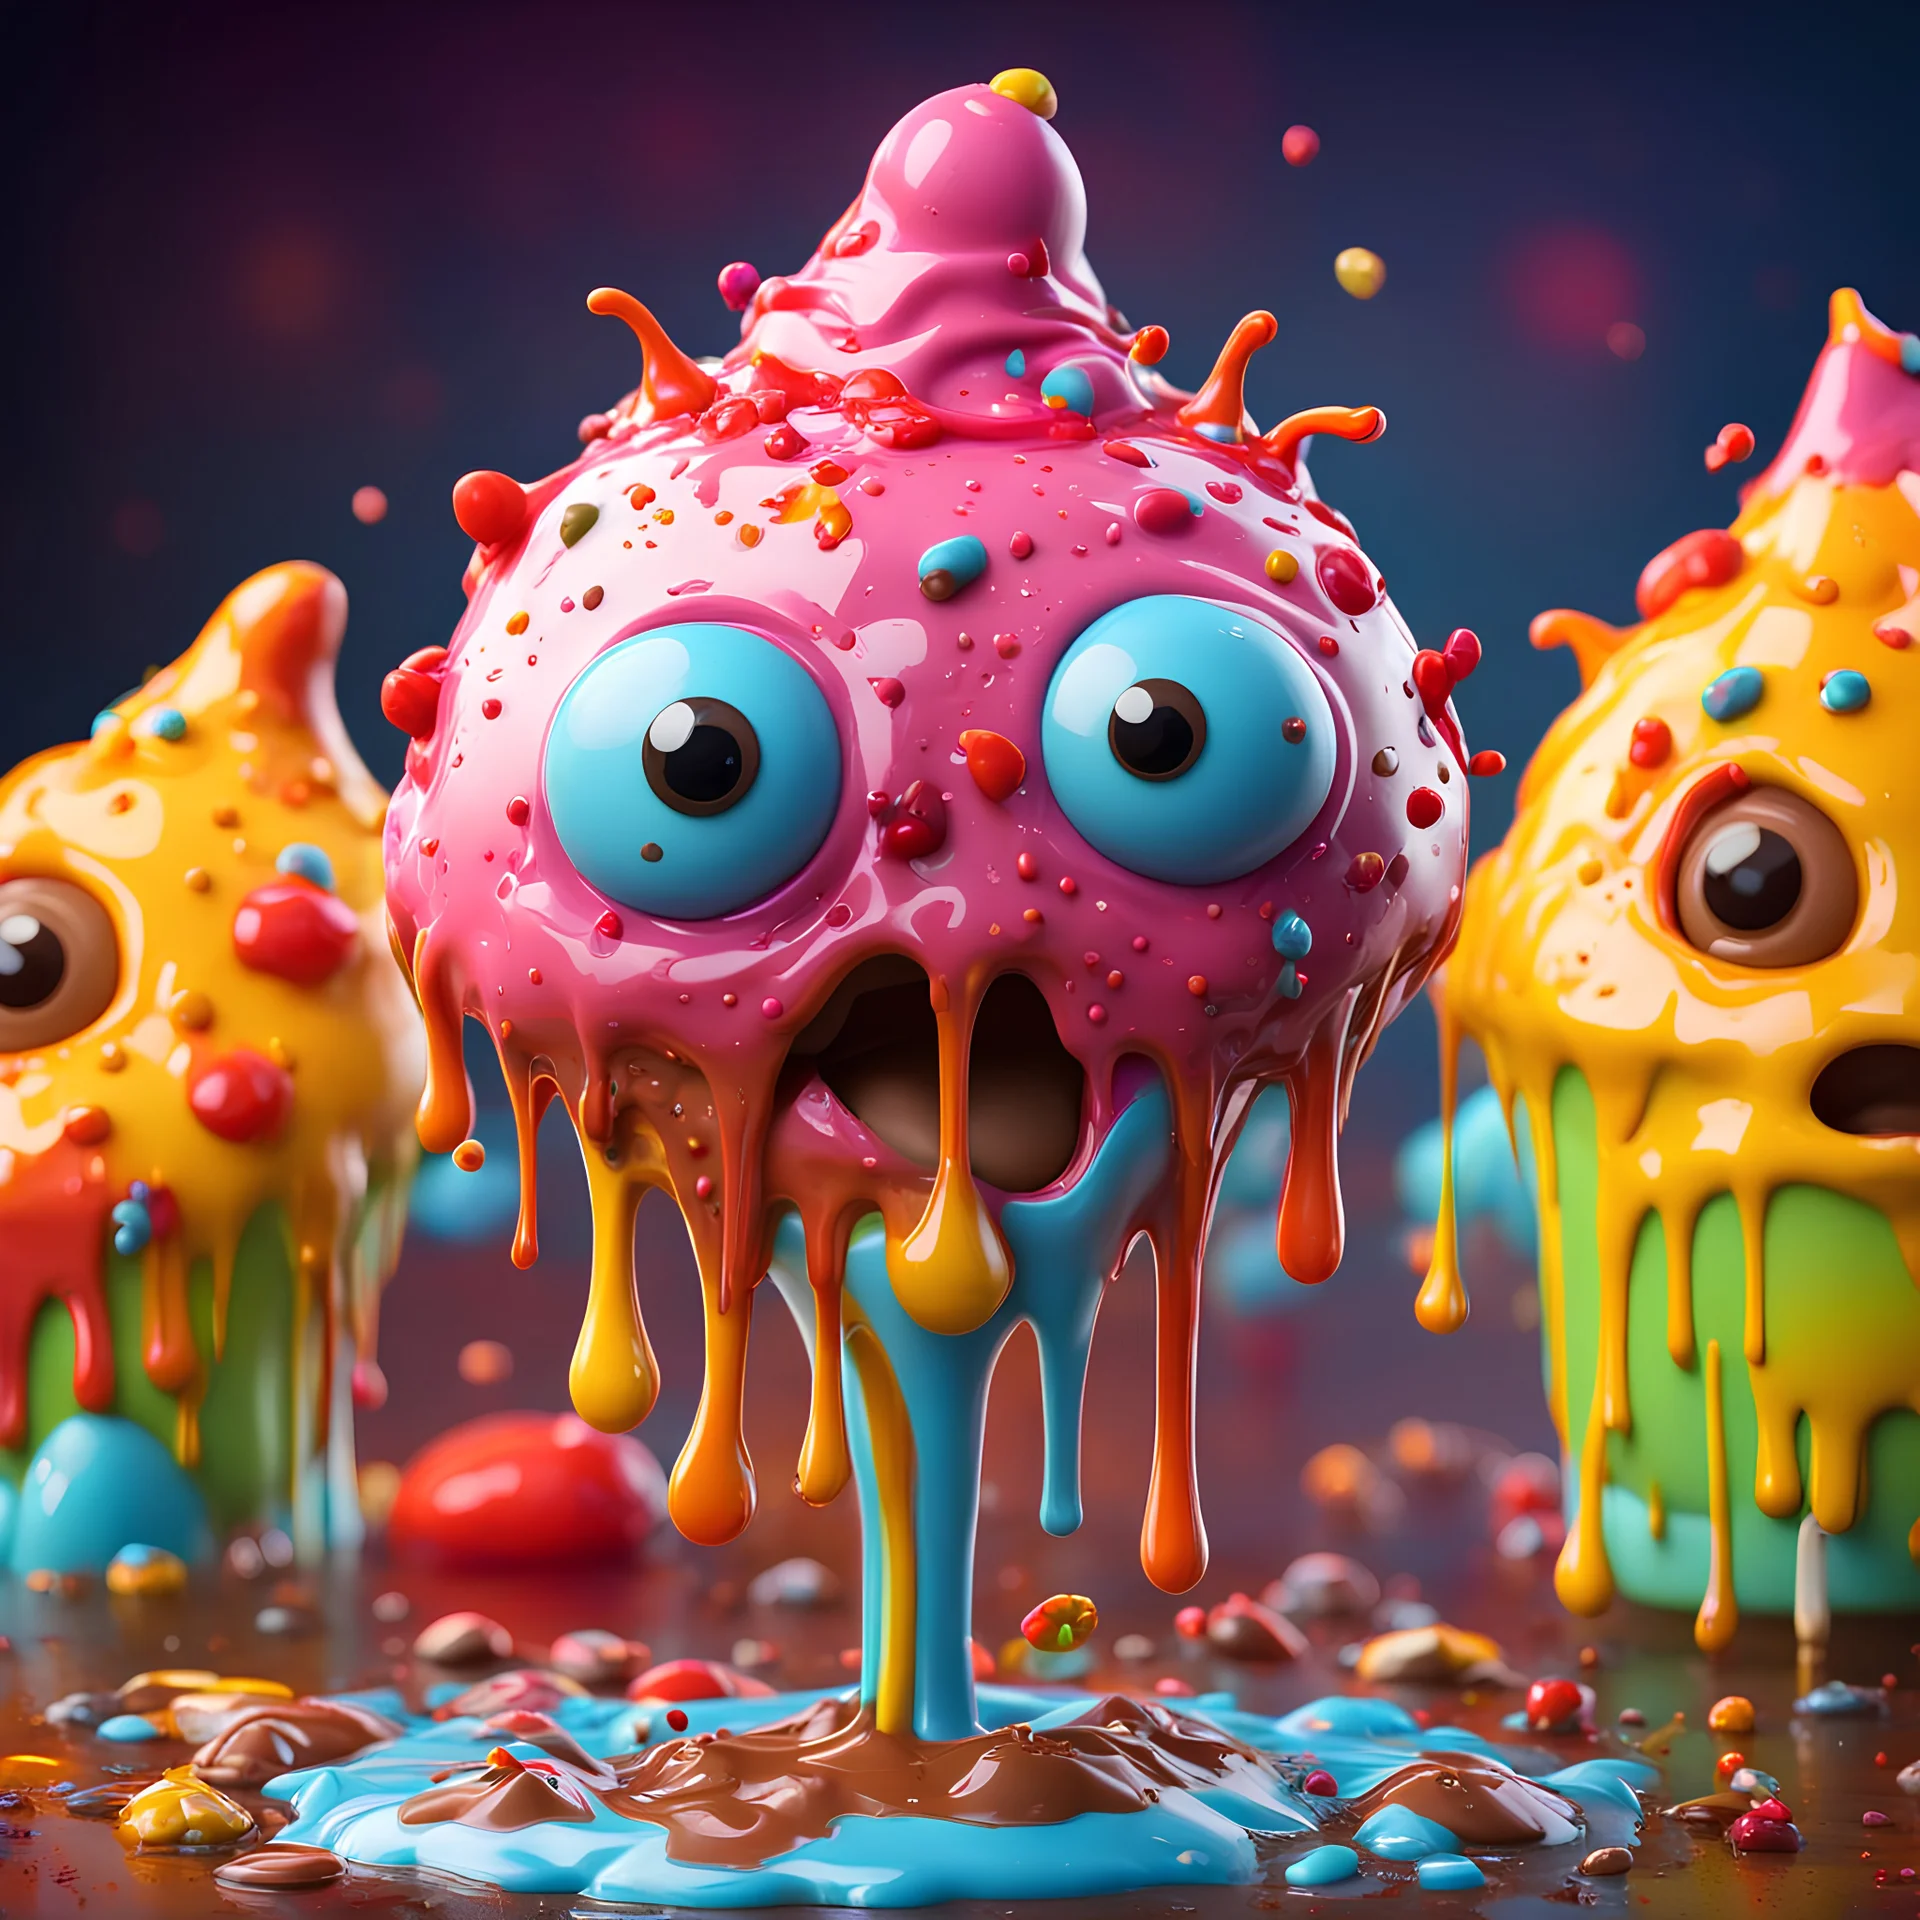 A cute adorable dripping gooey ice-cream monster, playful, vibrant colours, chocolate sprinkles, 3d render, hyper detailed, Z brush, cgi, Pixar 3D cartoon art, jelly texture, art by dr seuss, fun scary, animated realism, cartooncore, creative lighting, blender, artstation trending, unreal engine, octane render, digital art, wonky eyes, melting body, drizzled with toppings